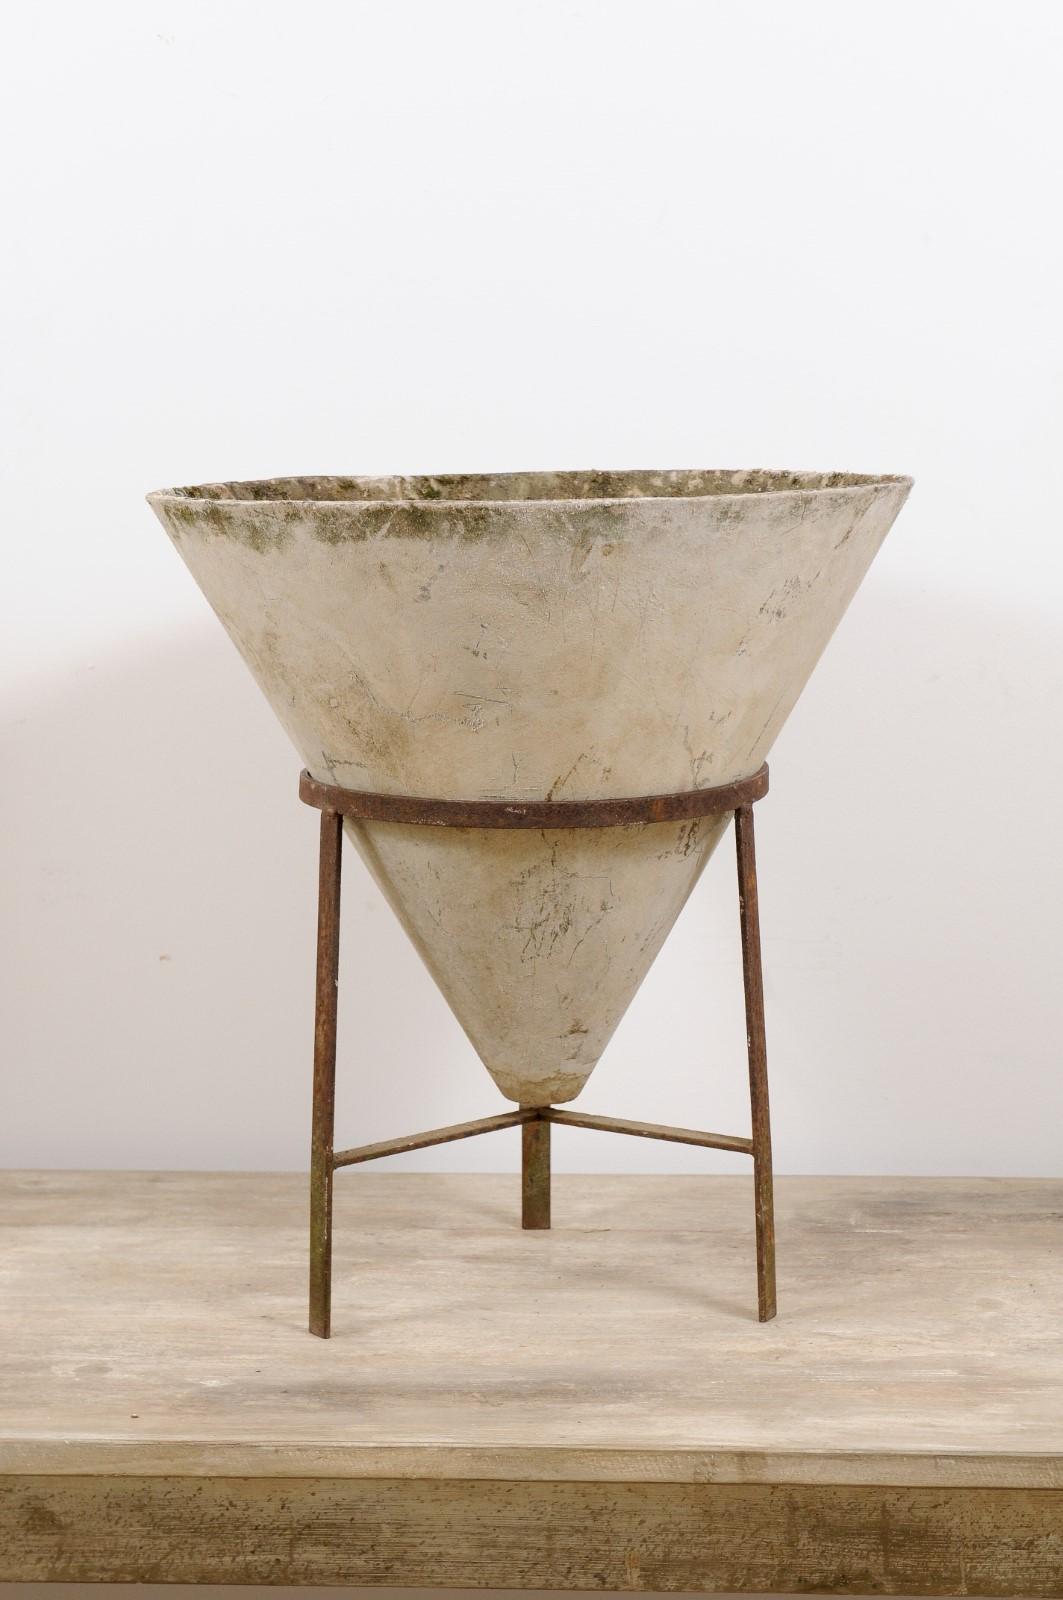 A vintage Mid-Century Modern Willy Guhl cone-shaped outdoors or indoors concrete planter with iron stand from Switzerland, circa 1960. 

Why we love it: Concrete has never looked so chic! The conical shape and iron metal stand make this Willy Guhl